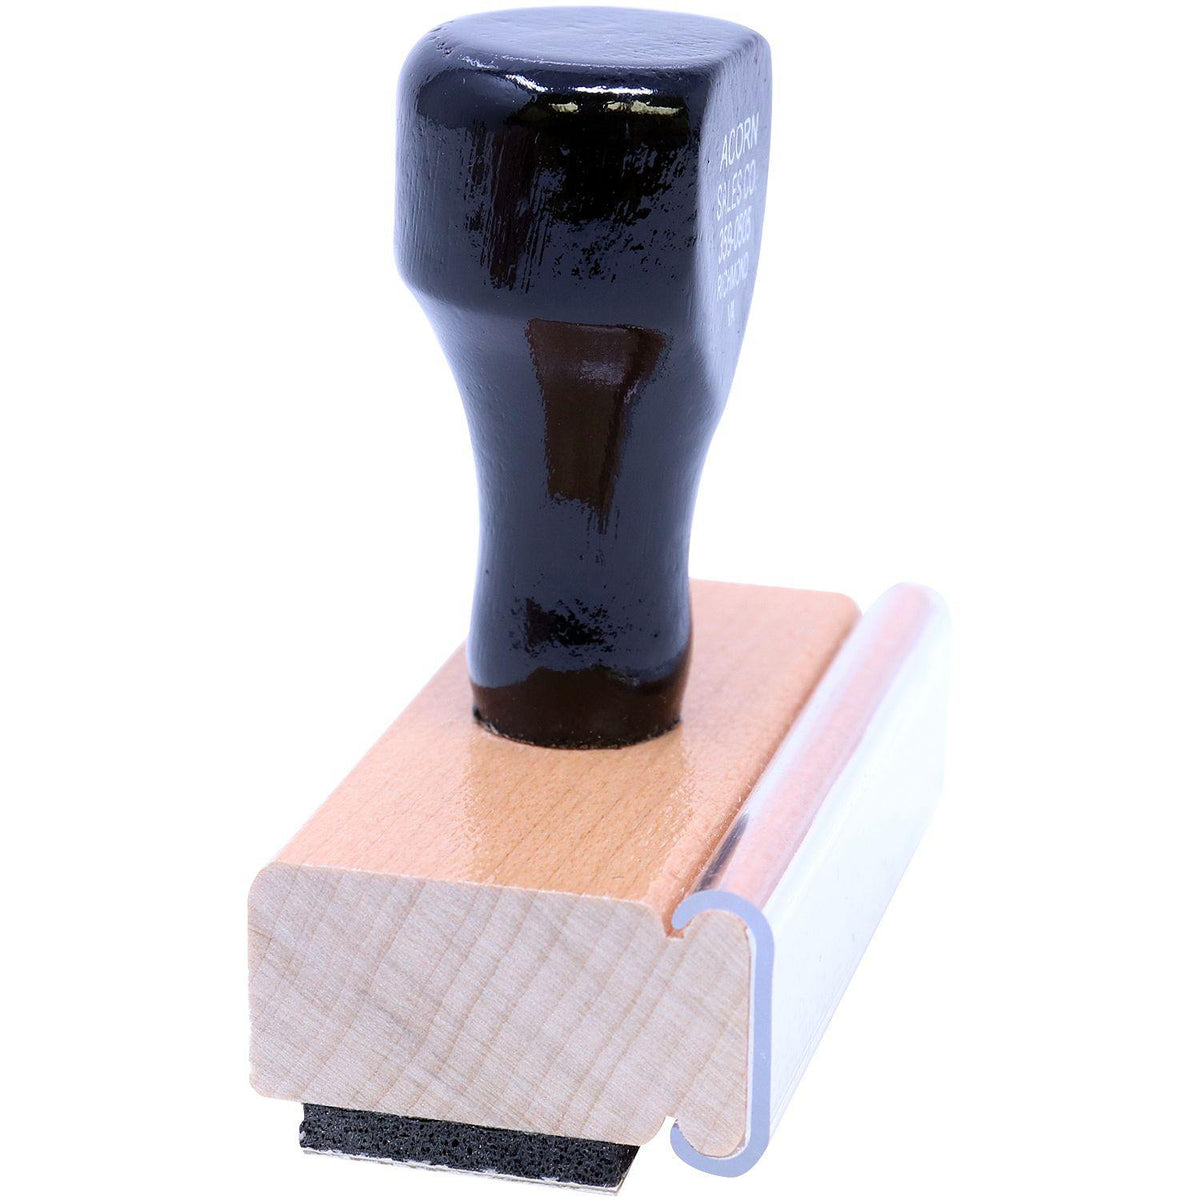 Side View of Large Outline Font Copy Rubber Stamp at an Angle